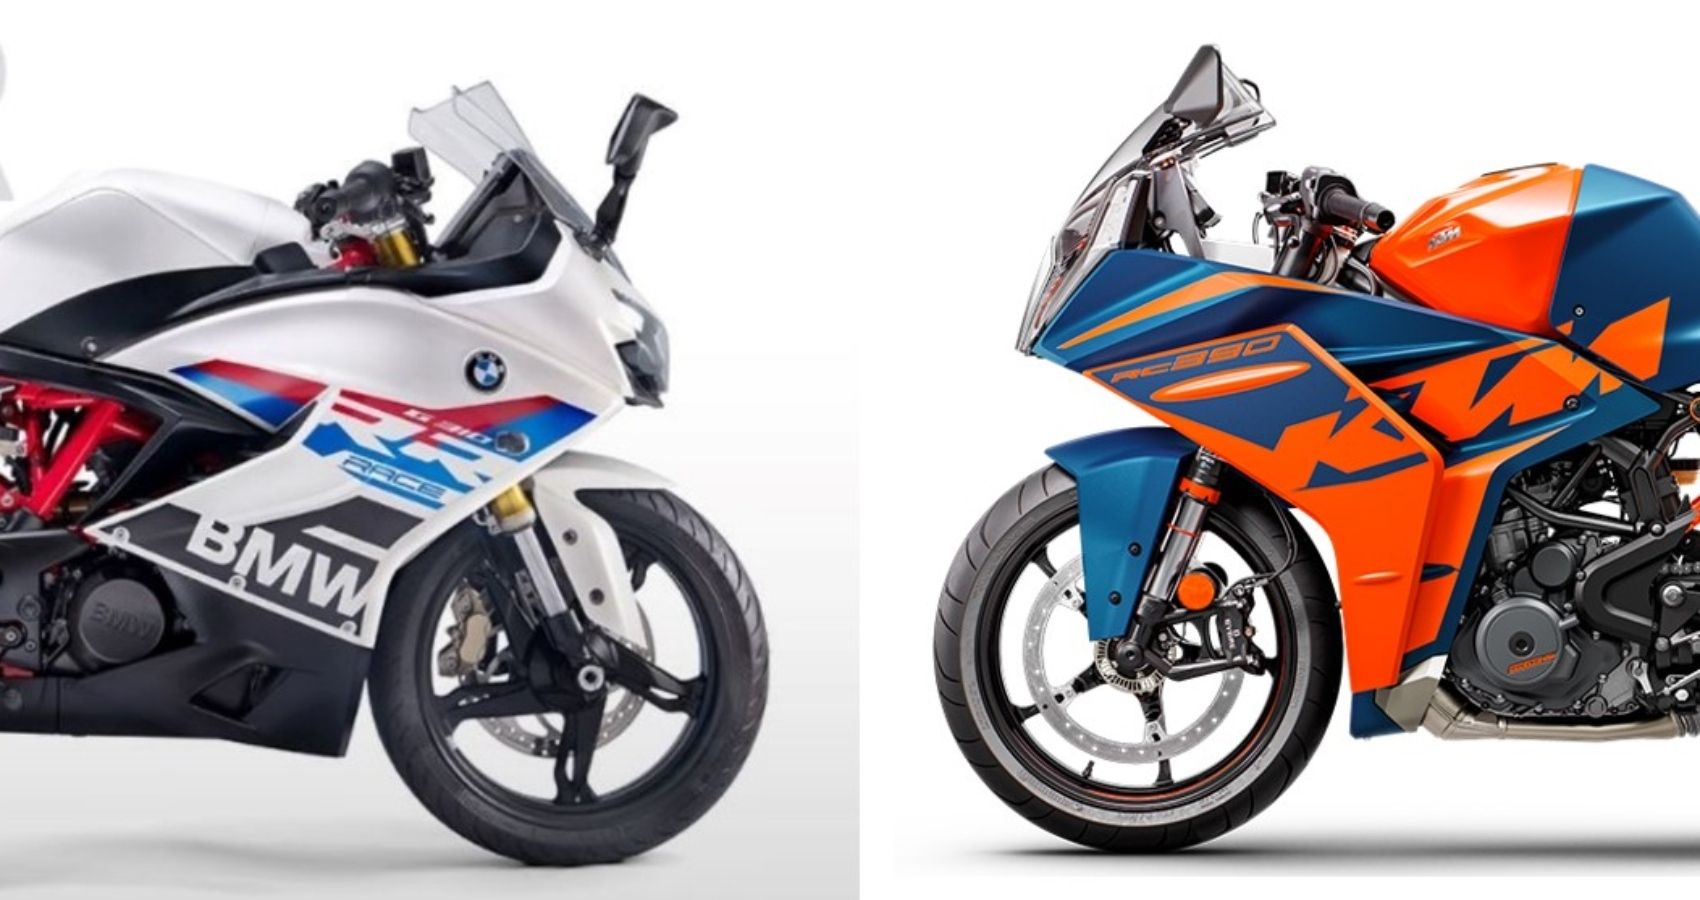 BMW G 310 RR and KTM RC 390 side profiles head on